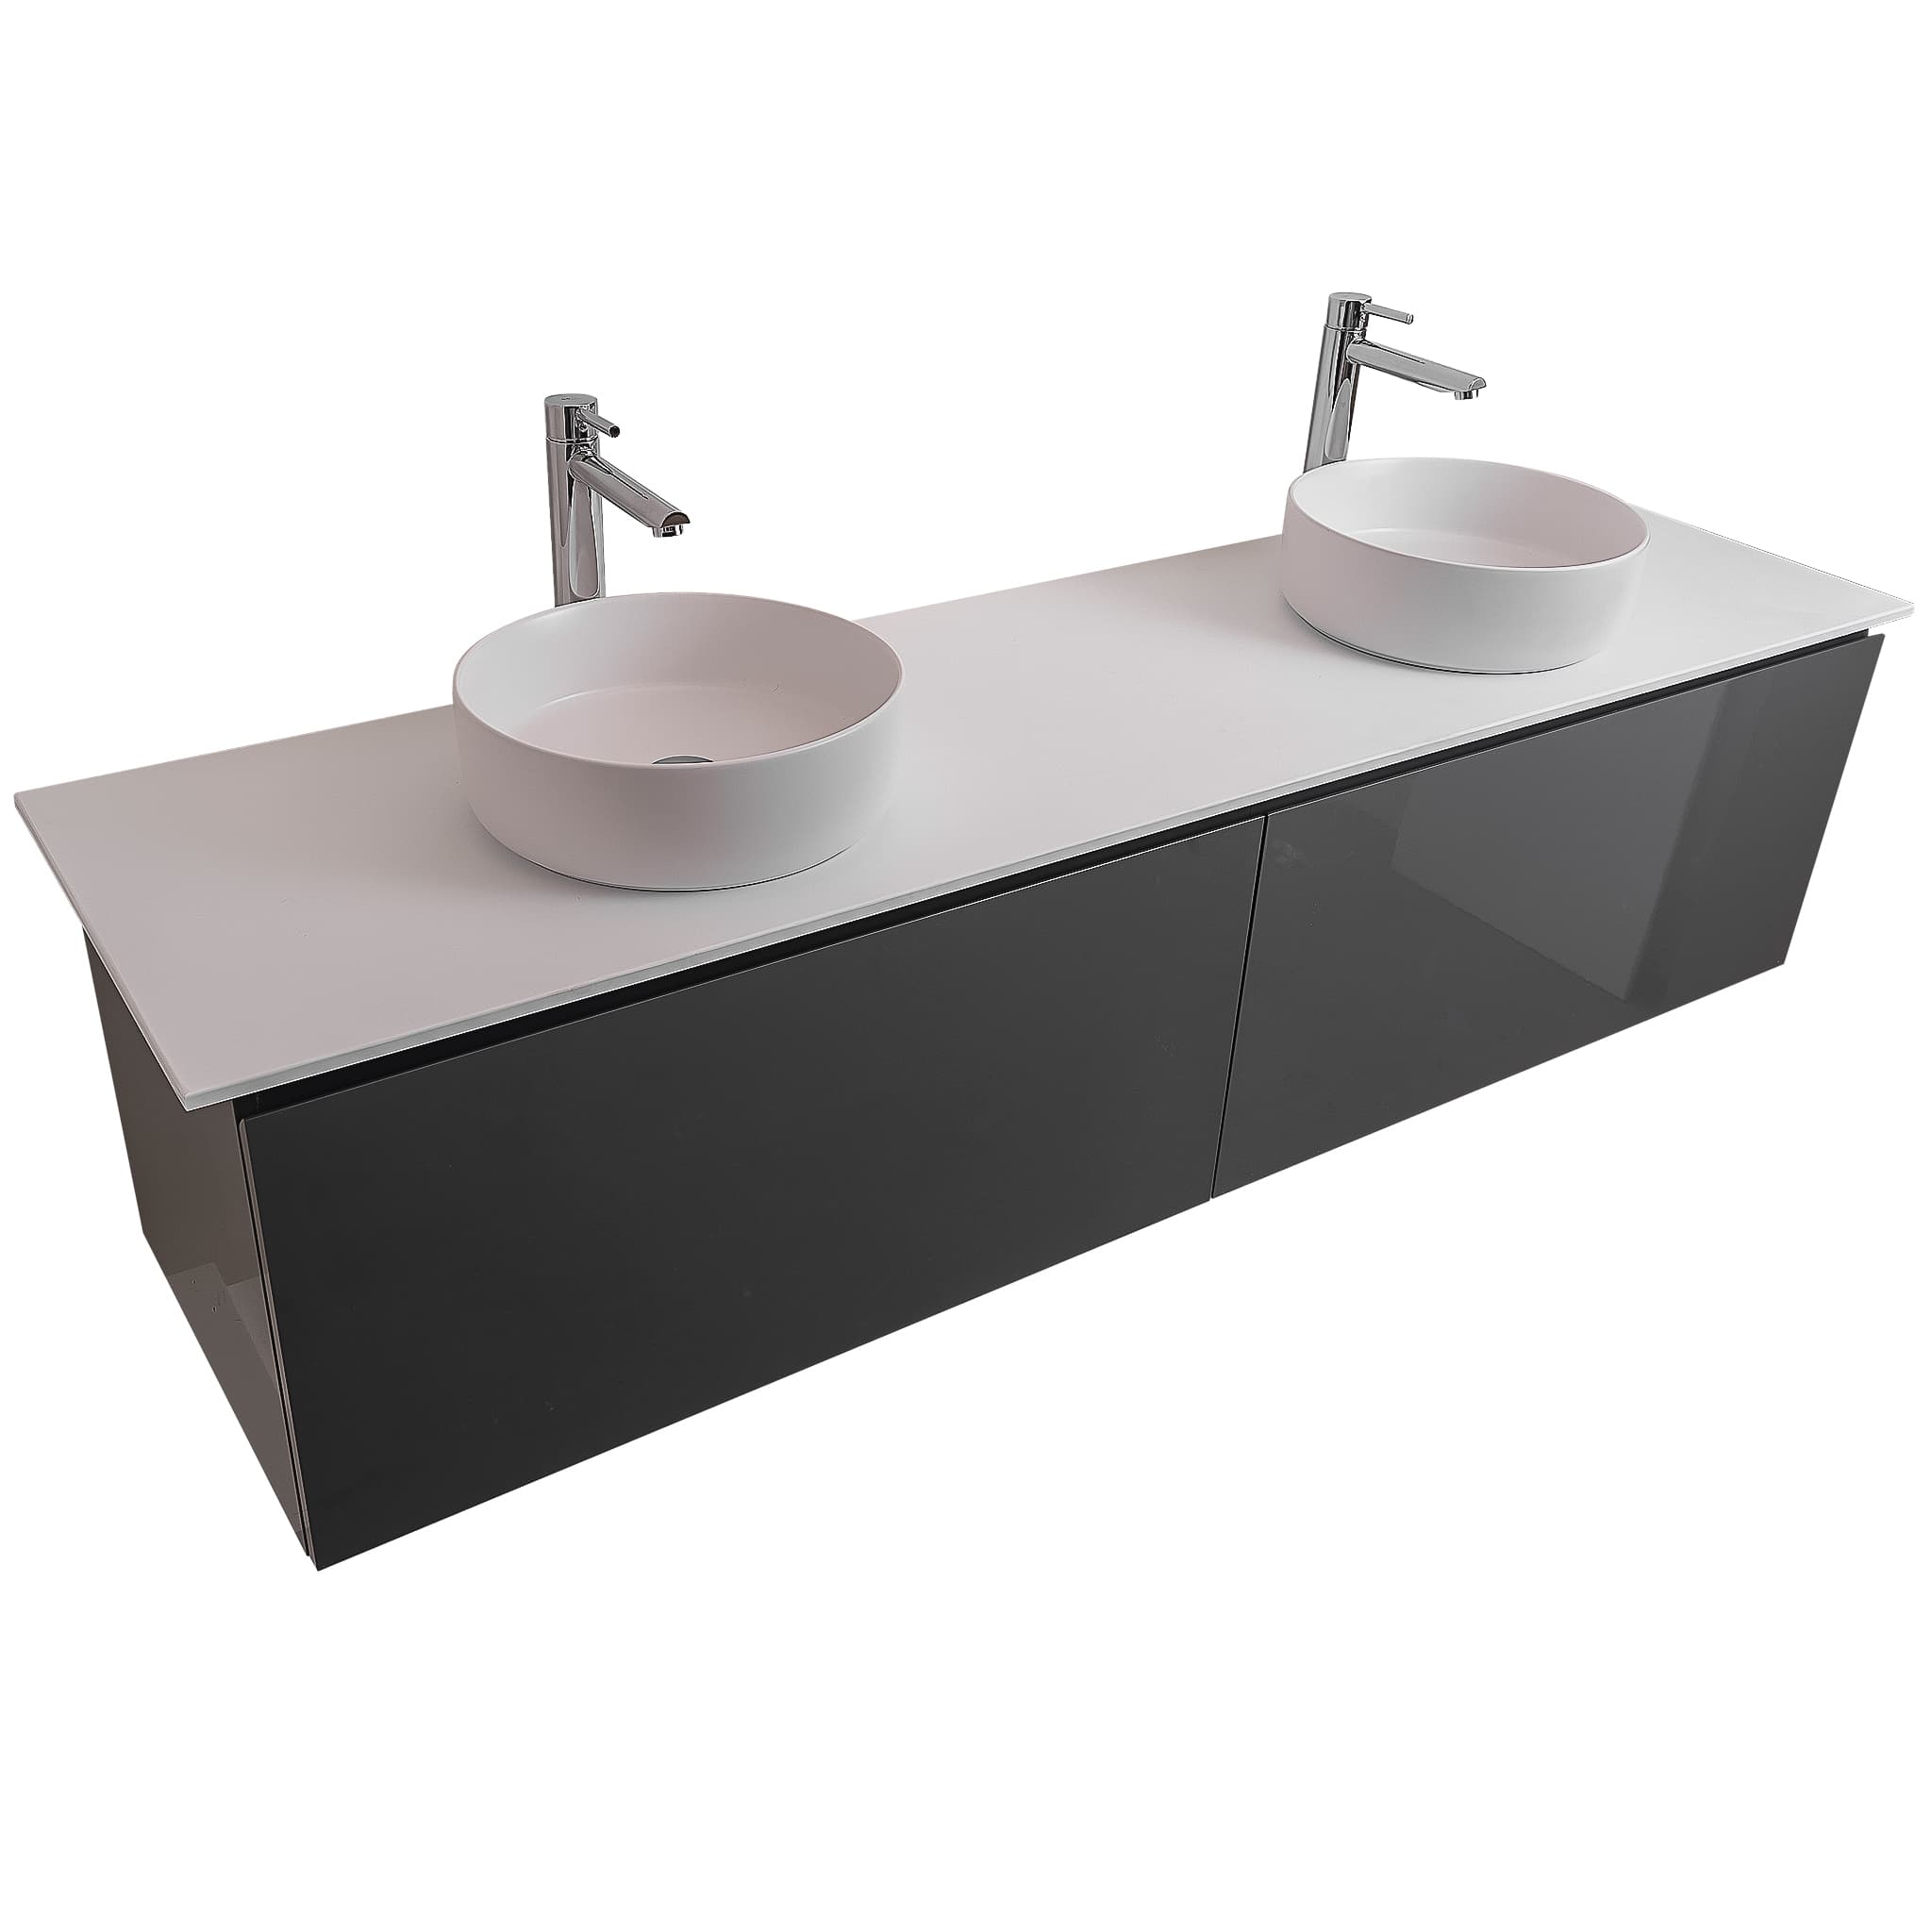 Venice 63 Anthracite High Gloss Cabinet,  Ares White Top And Two Ares White Ceramic Basin, Wall Mounted Modern Vanity Set